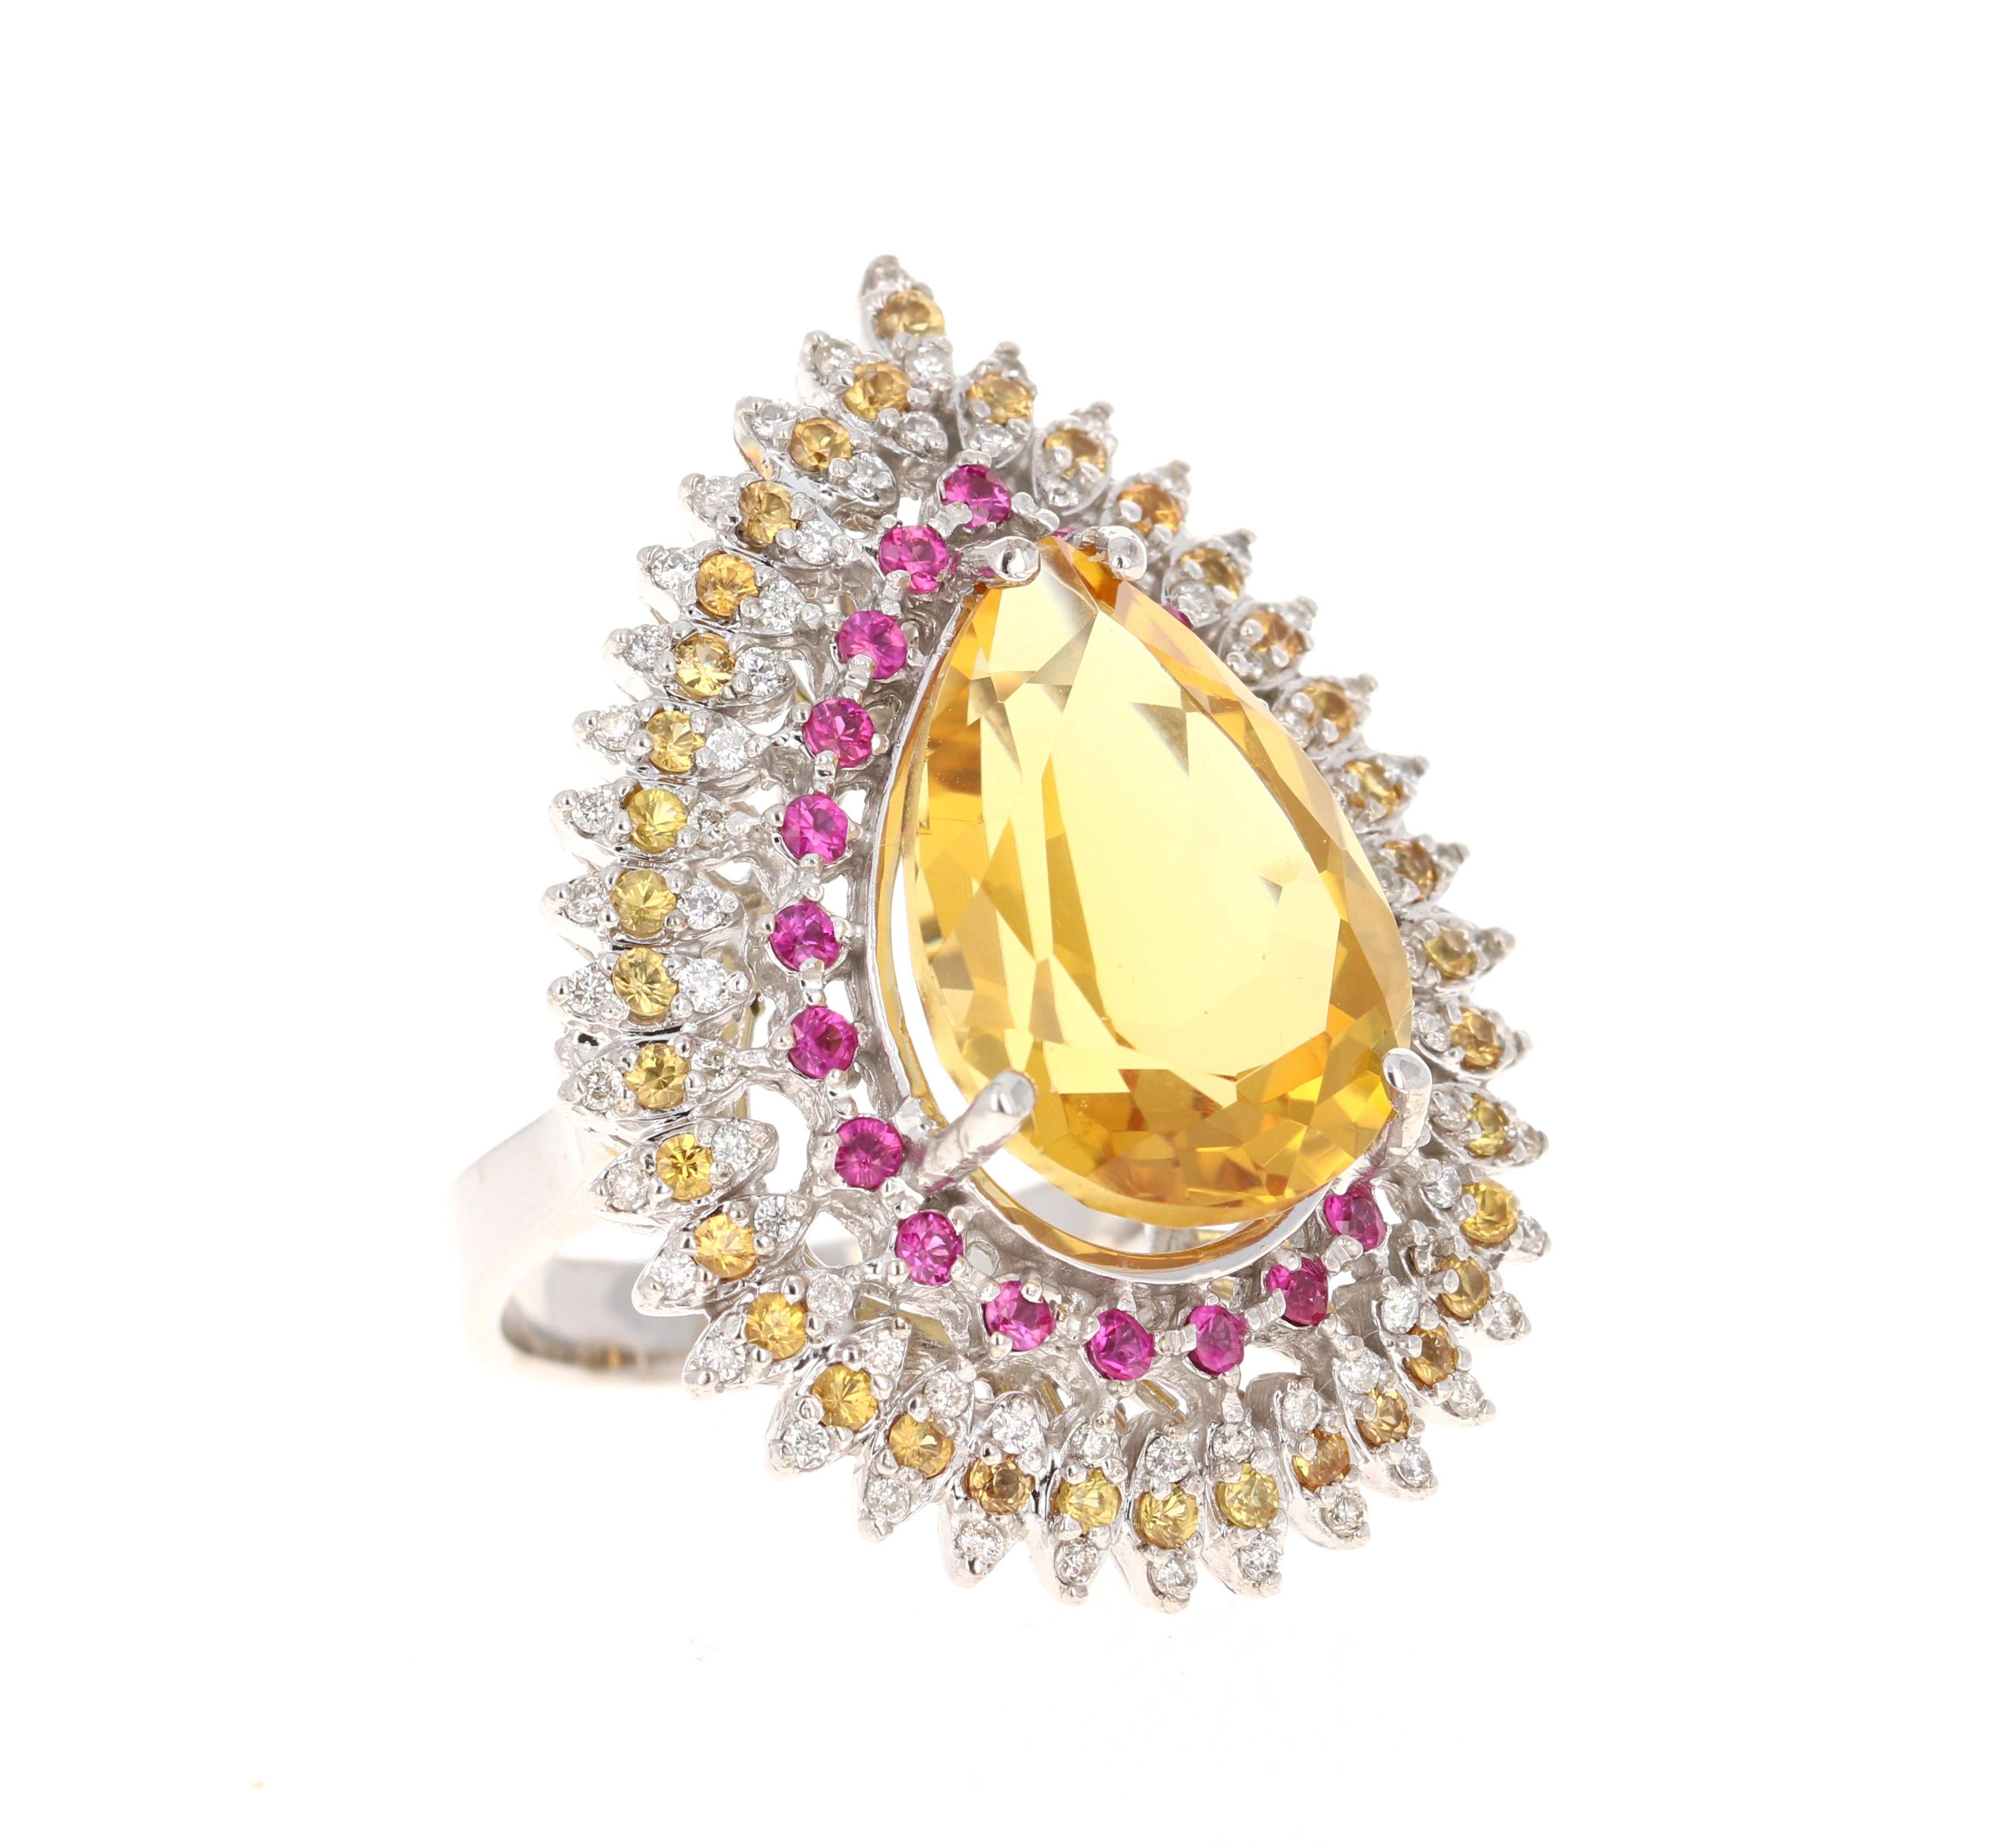 This ring has a natural Pear Cut Citrine that weighs 11.42 carats. The Citrine measures at 19 mm x 14 mm and has a beautiful golden yellow hue. The pink sapphires that adorn the ring weigh 0.84 carats and the yellow sapphires weigh 0.86 carats.